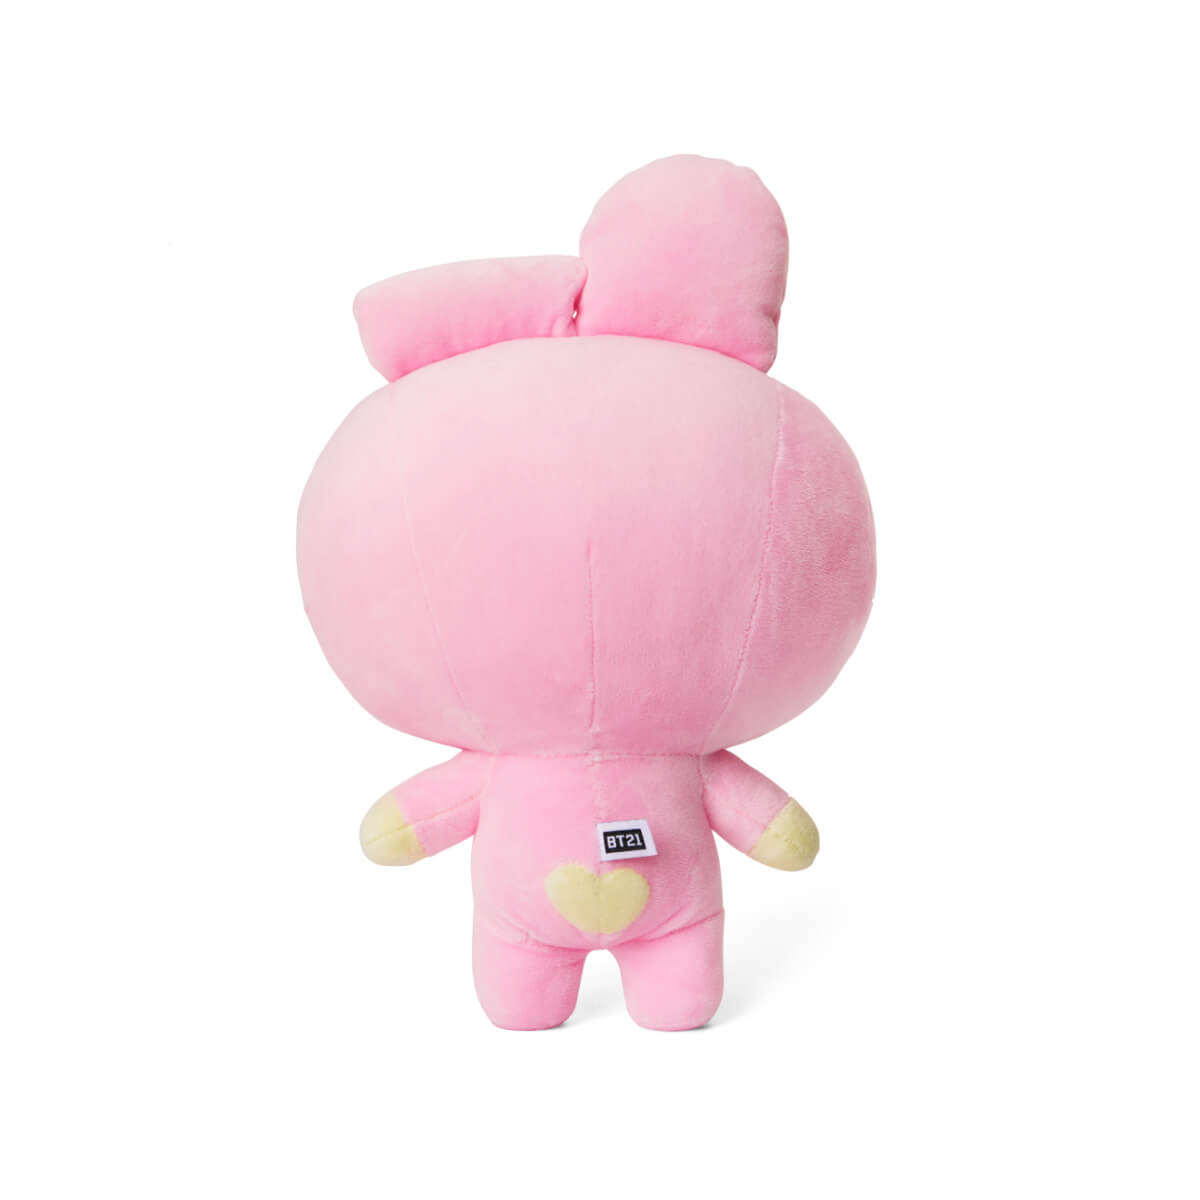 BT21 COOKY BABY Standing Doll